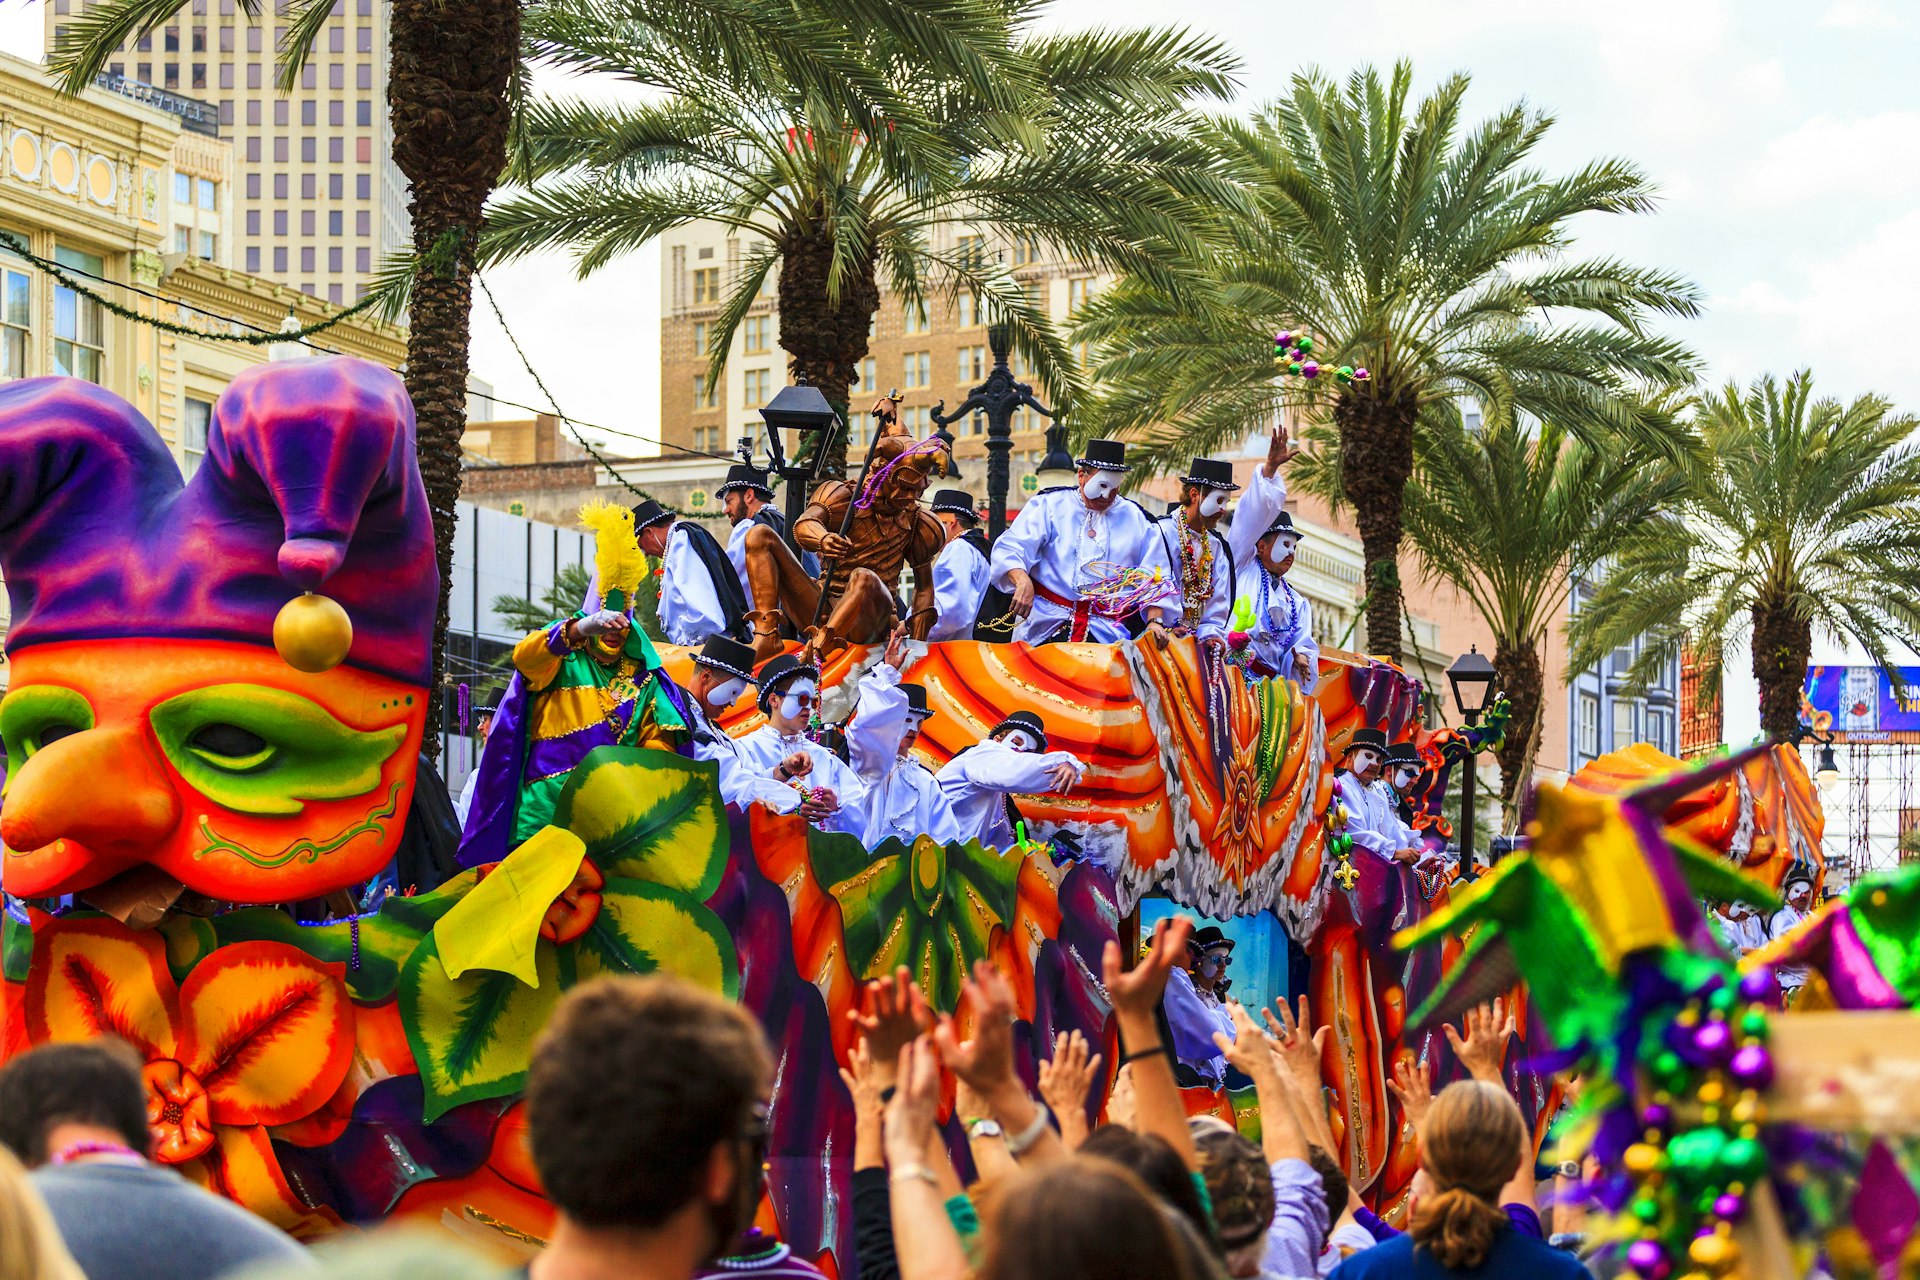 A colorful krewe floats through the streets of New Orleans during a Mardi Gras parade